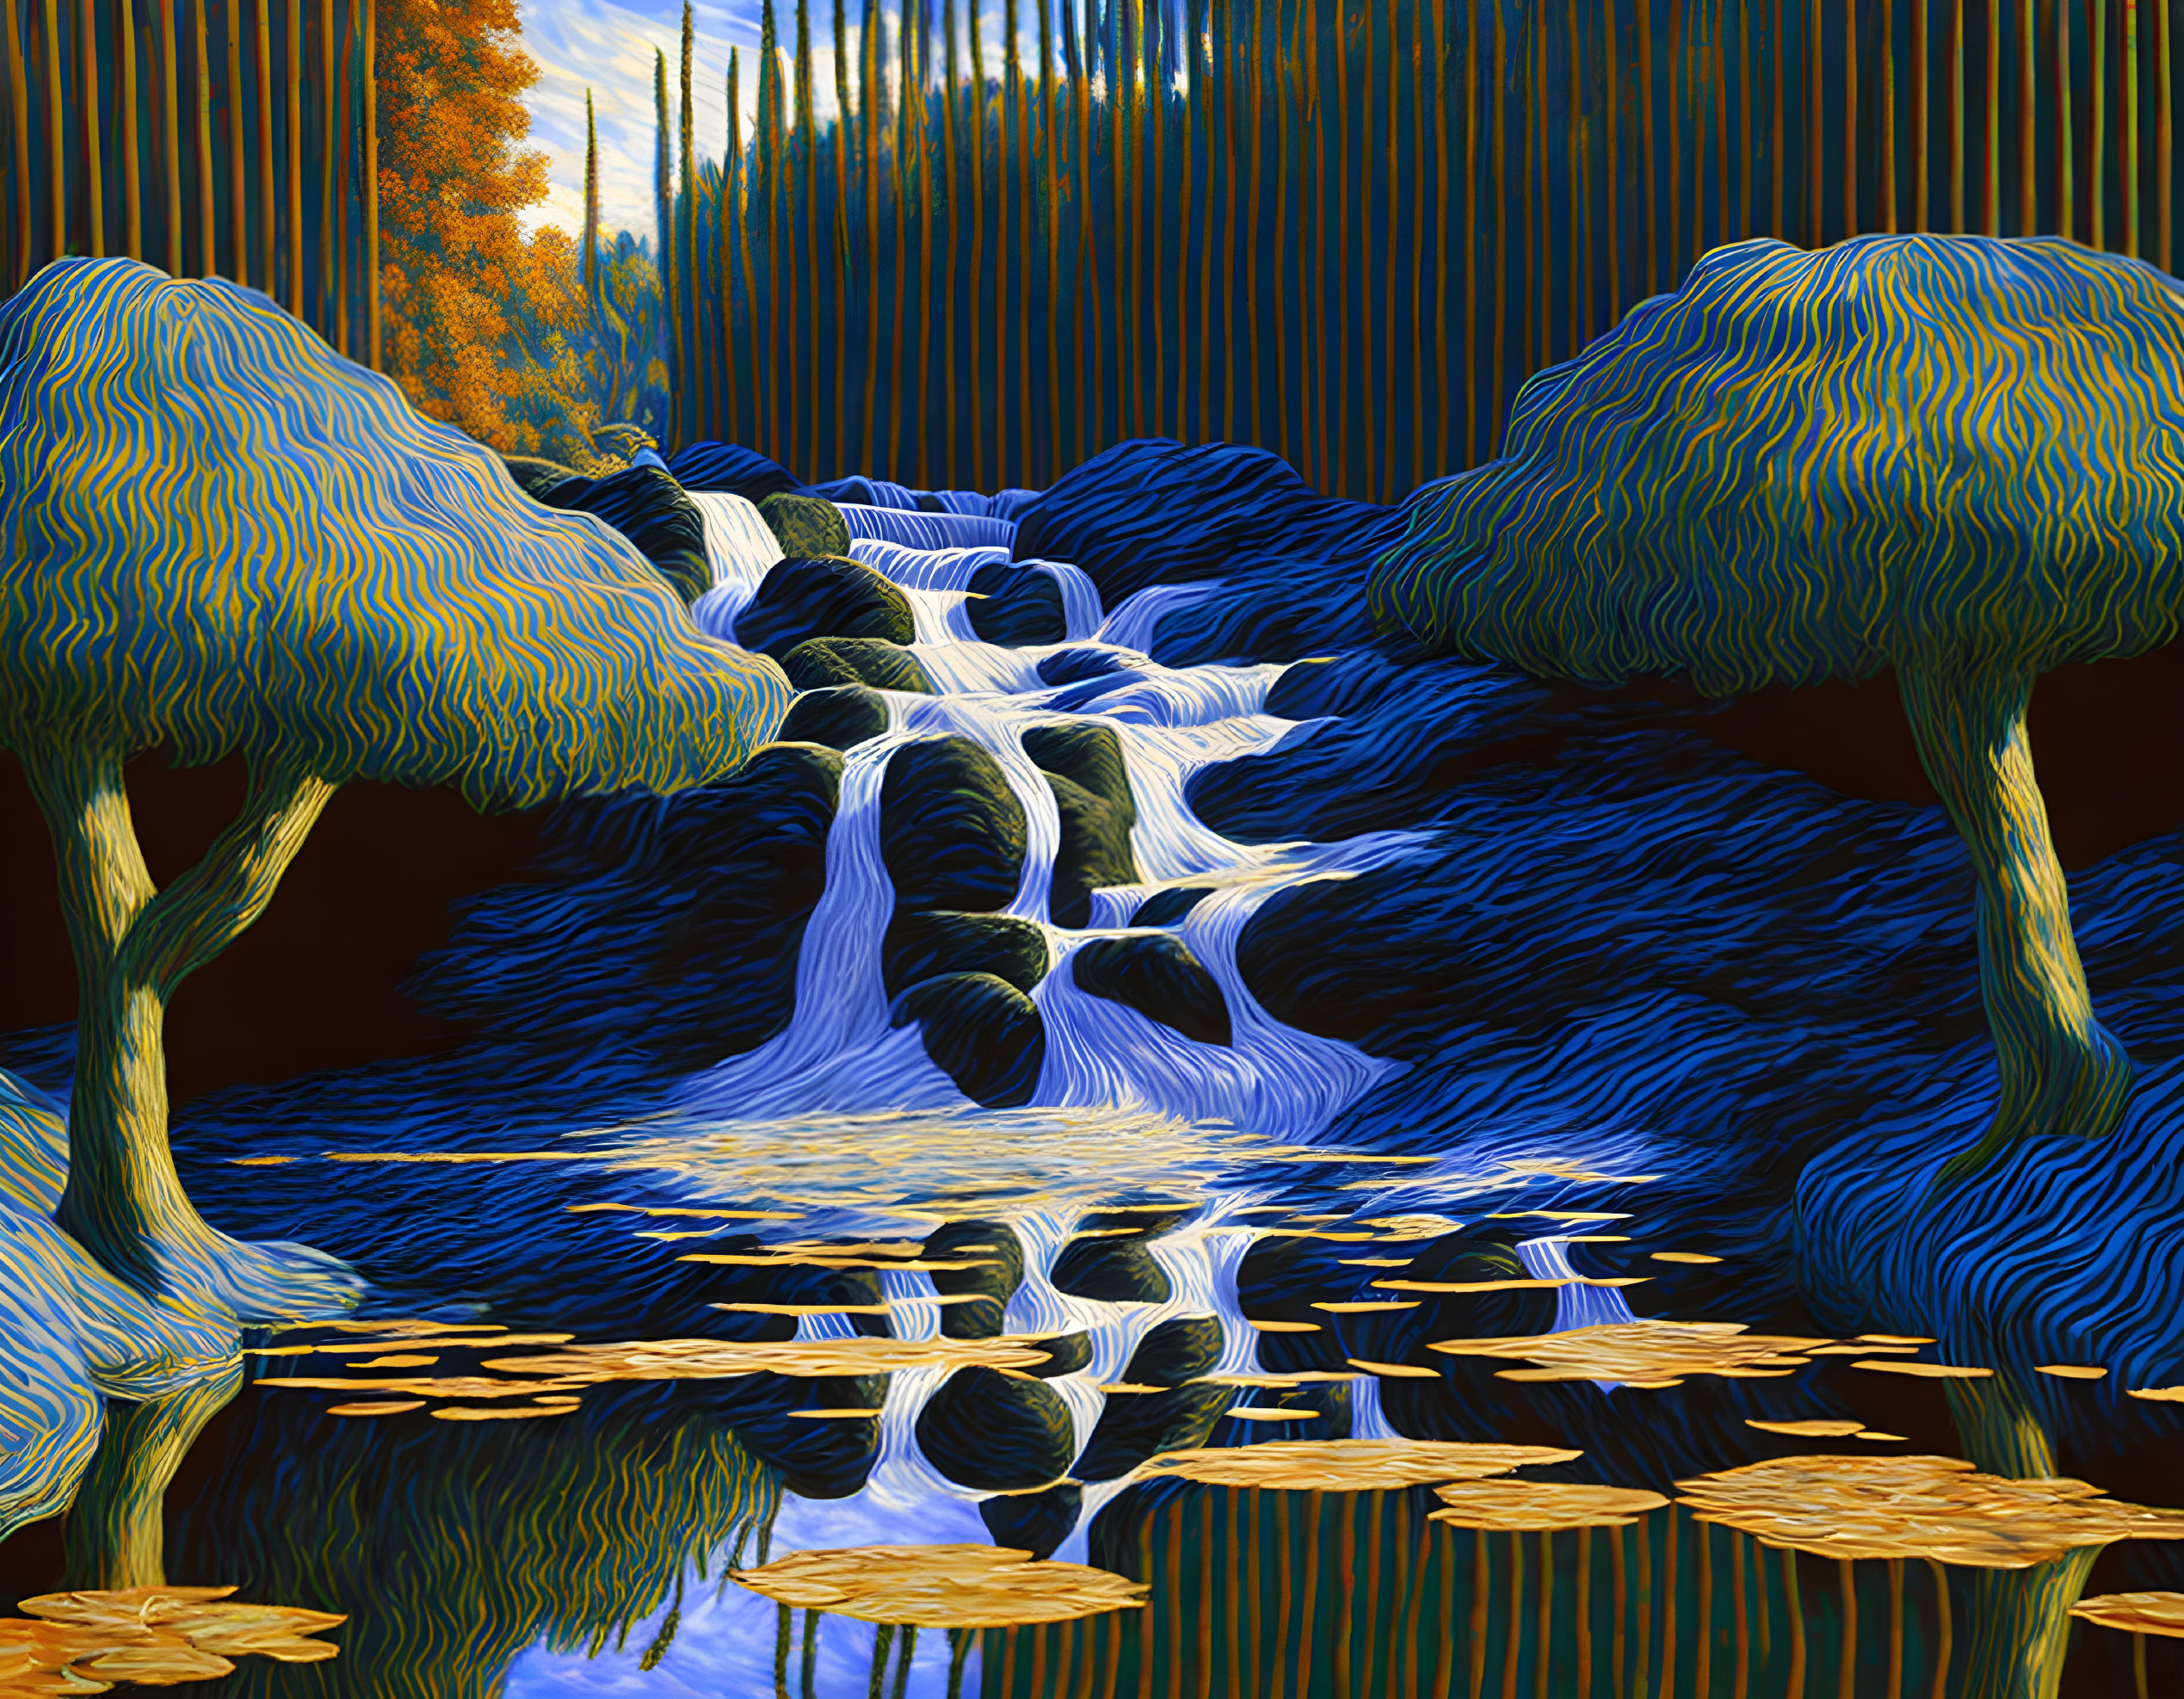 Surreal landscape digital painting with waterfall, trees, river, and striped sky